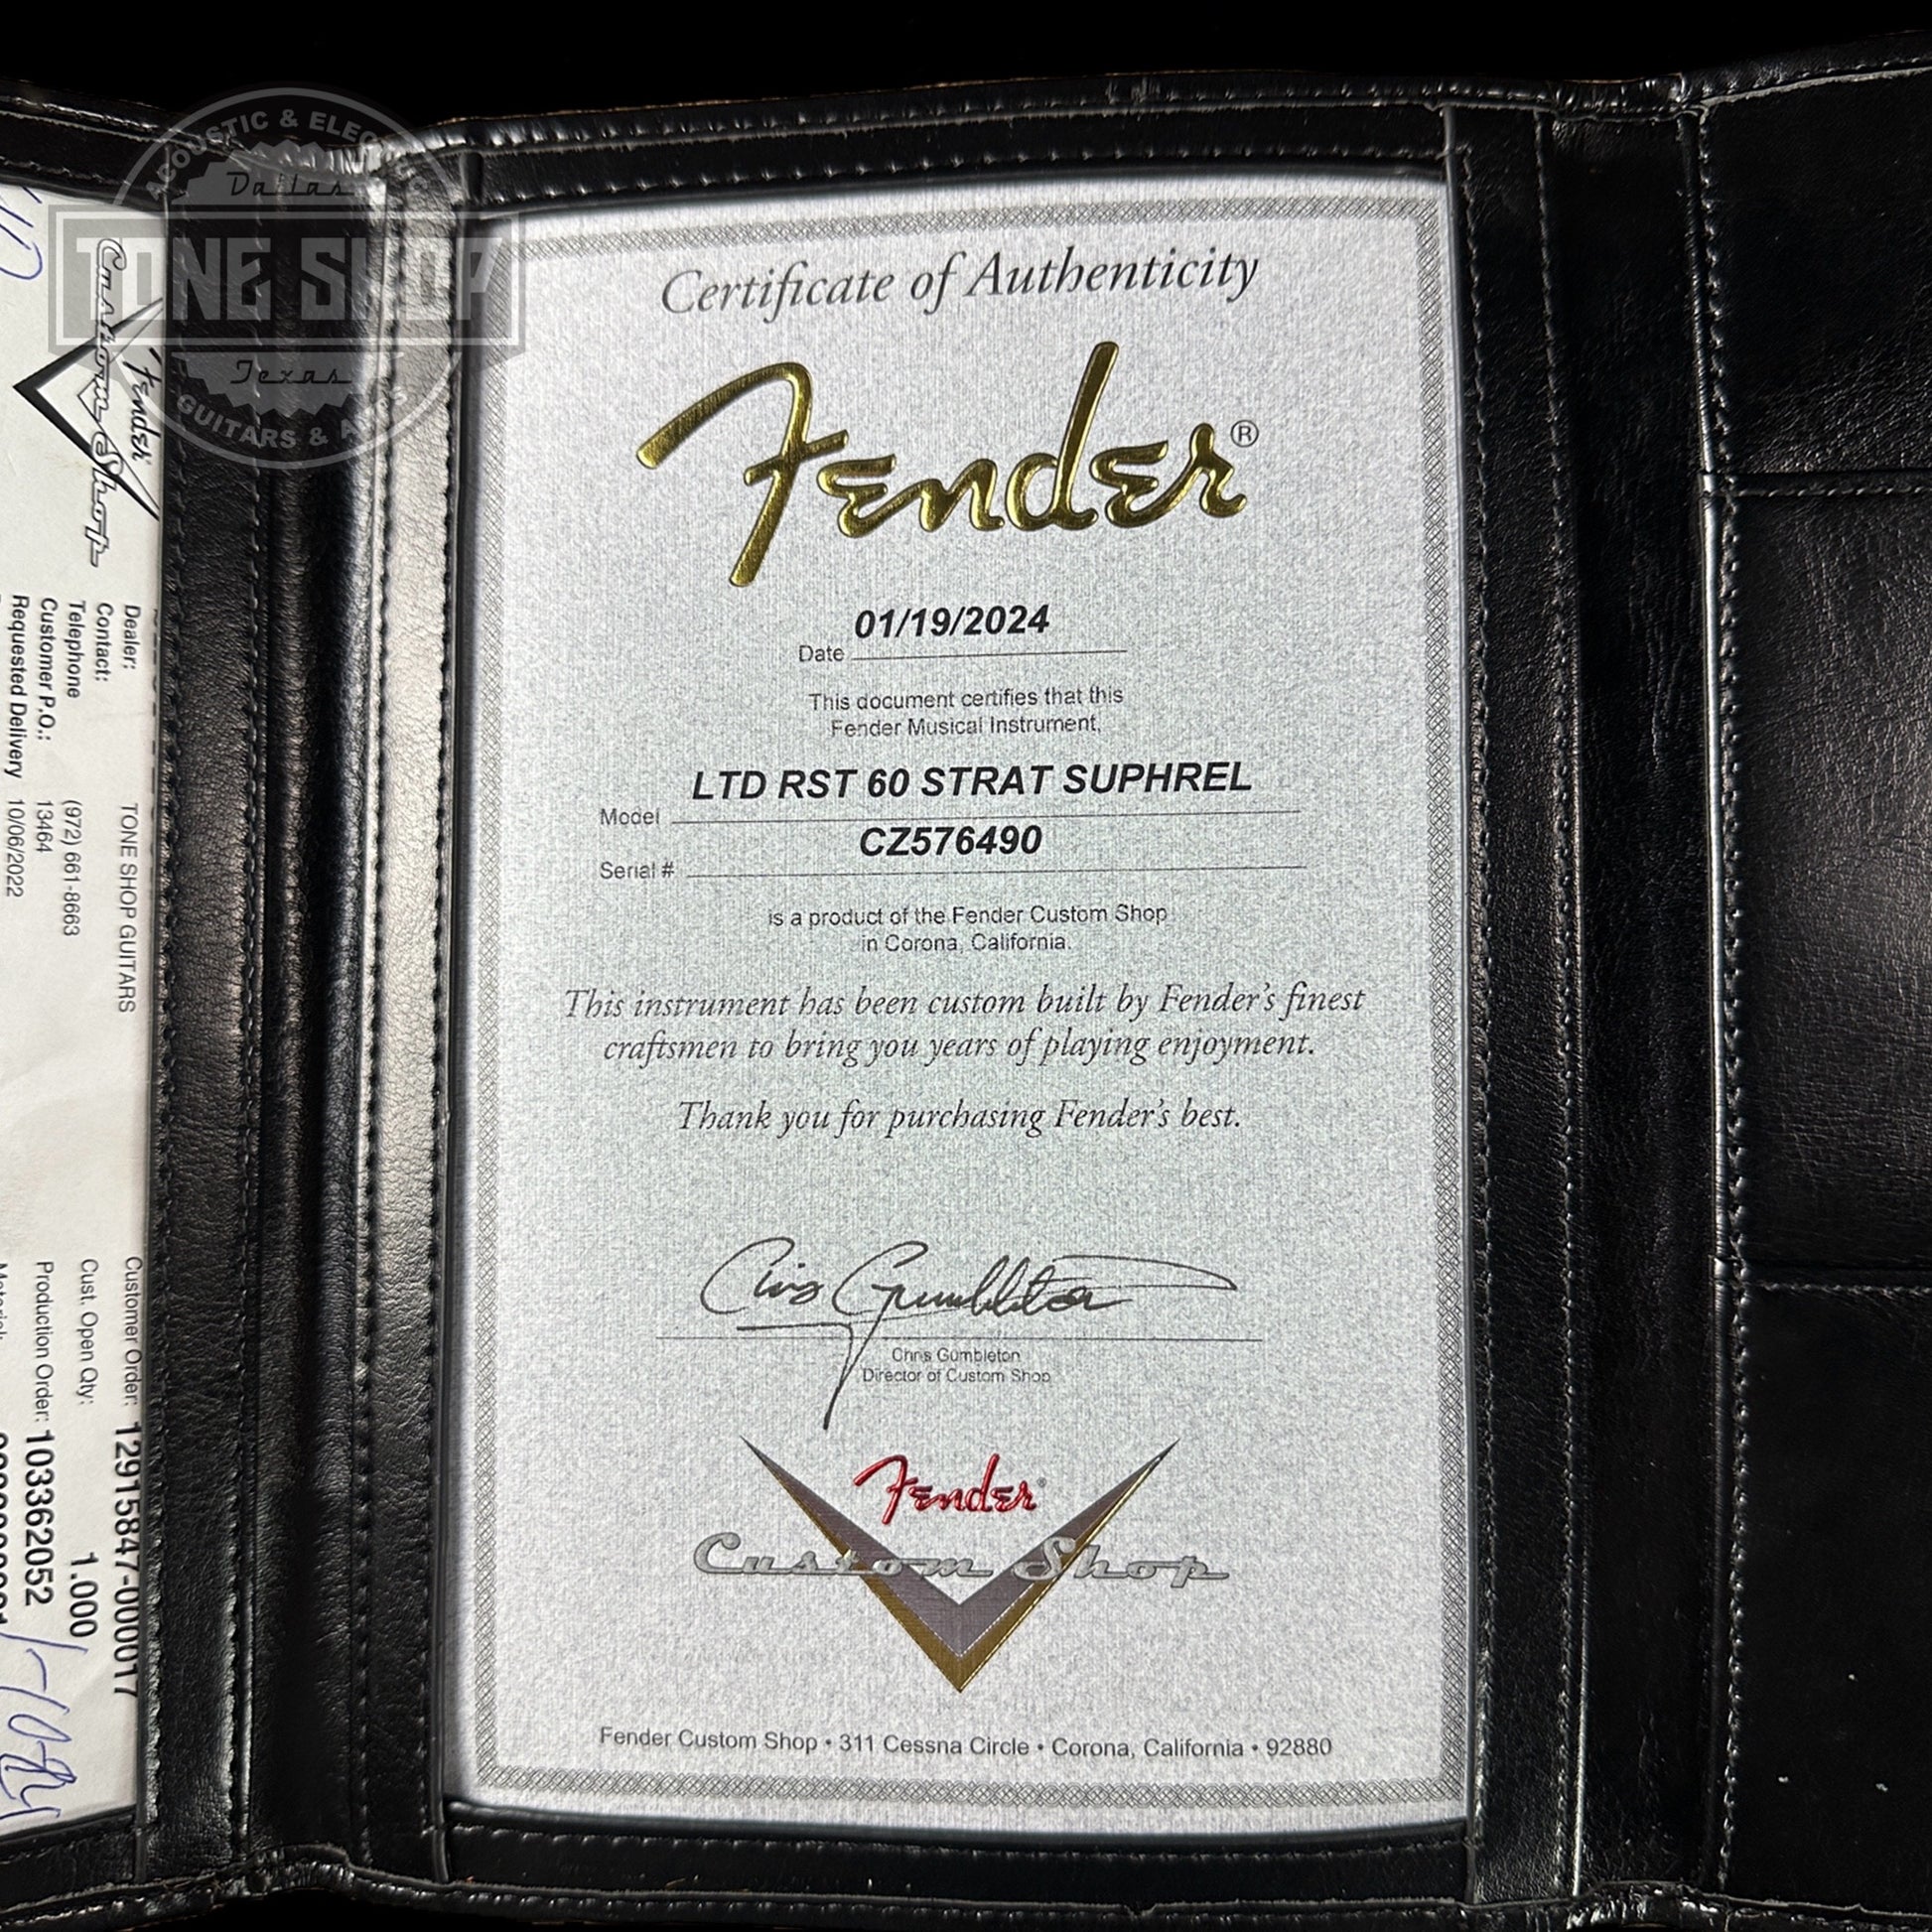 Certificate of authenticity for Fender Custom Shop Limited Edition Roasted '60 Strat Super Heavy Relic Aged Olympic White Over 3 Color Sunburst.